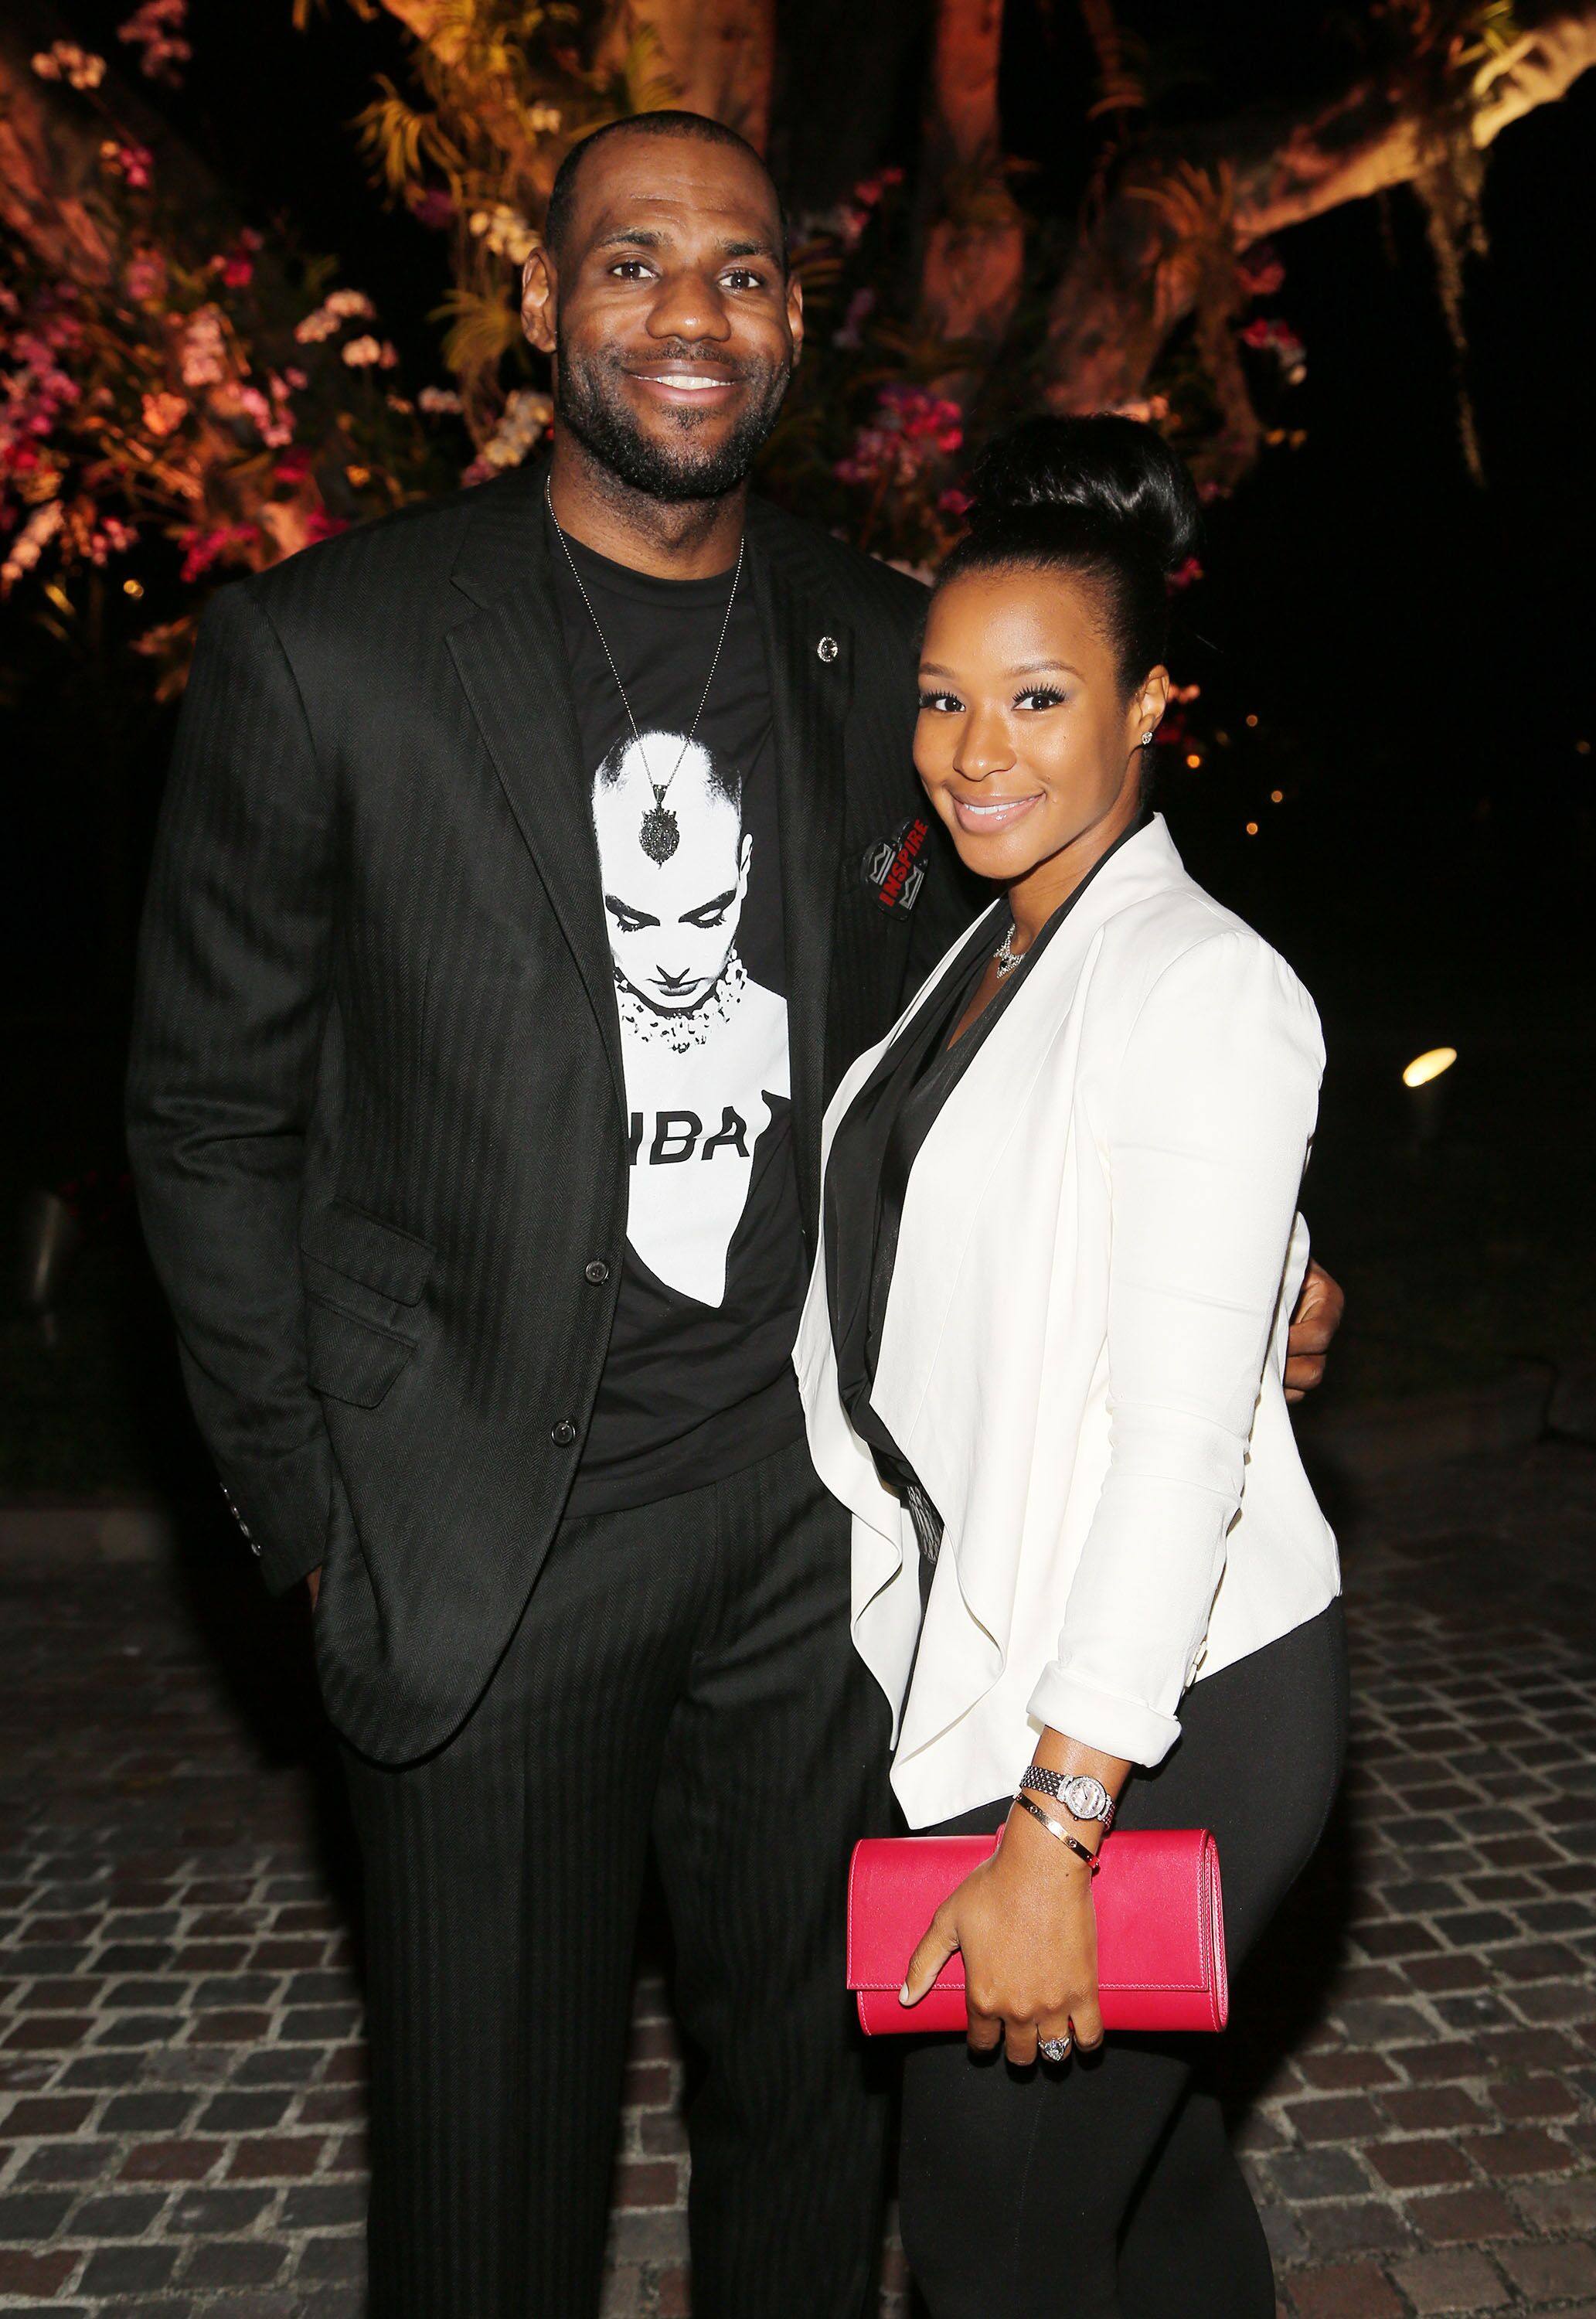 LeBron James and Savannah Brinson attend the Miami HEAT Family Foundation night of "Motown Revue" on February 27, 2013 in Miami, Florida | Photo: Getty Images